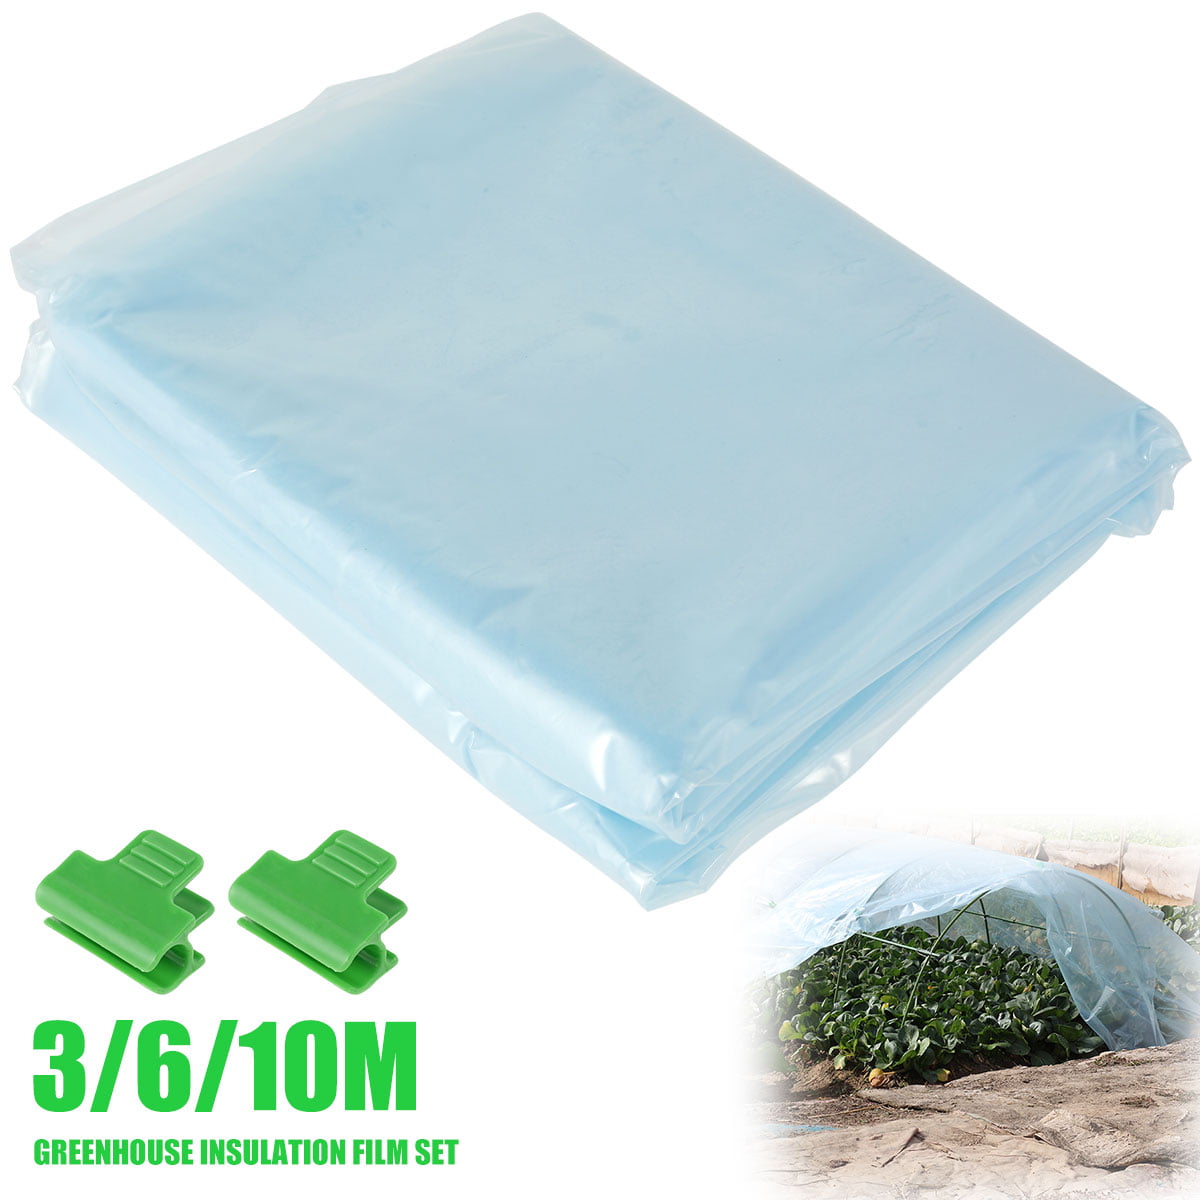 Markeny Clear Greenhouse Film 3 PCS 78.74 × 78.74 Inches Thicken Garden Clear Polyethylene Film Windproof & Dust Proof Plastic Cover for Greenhouse Plants 